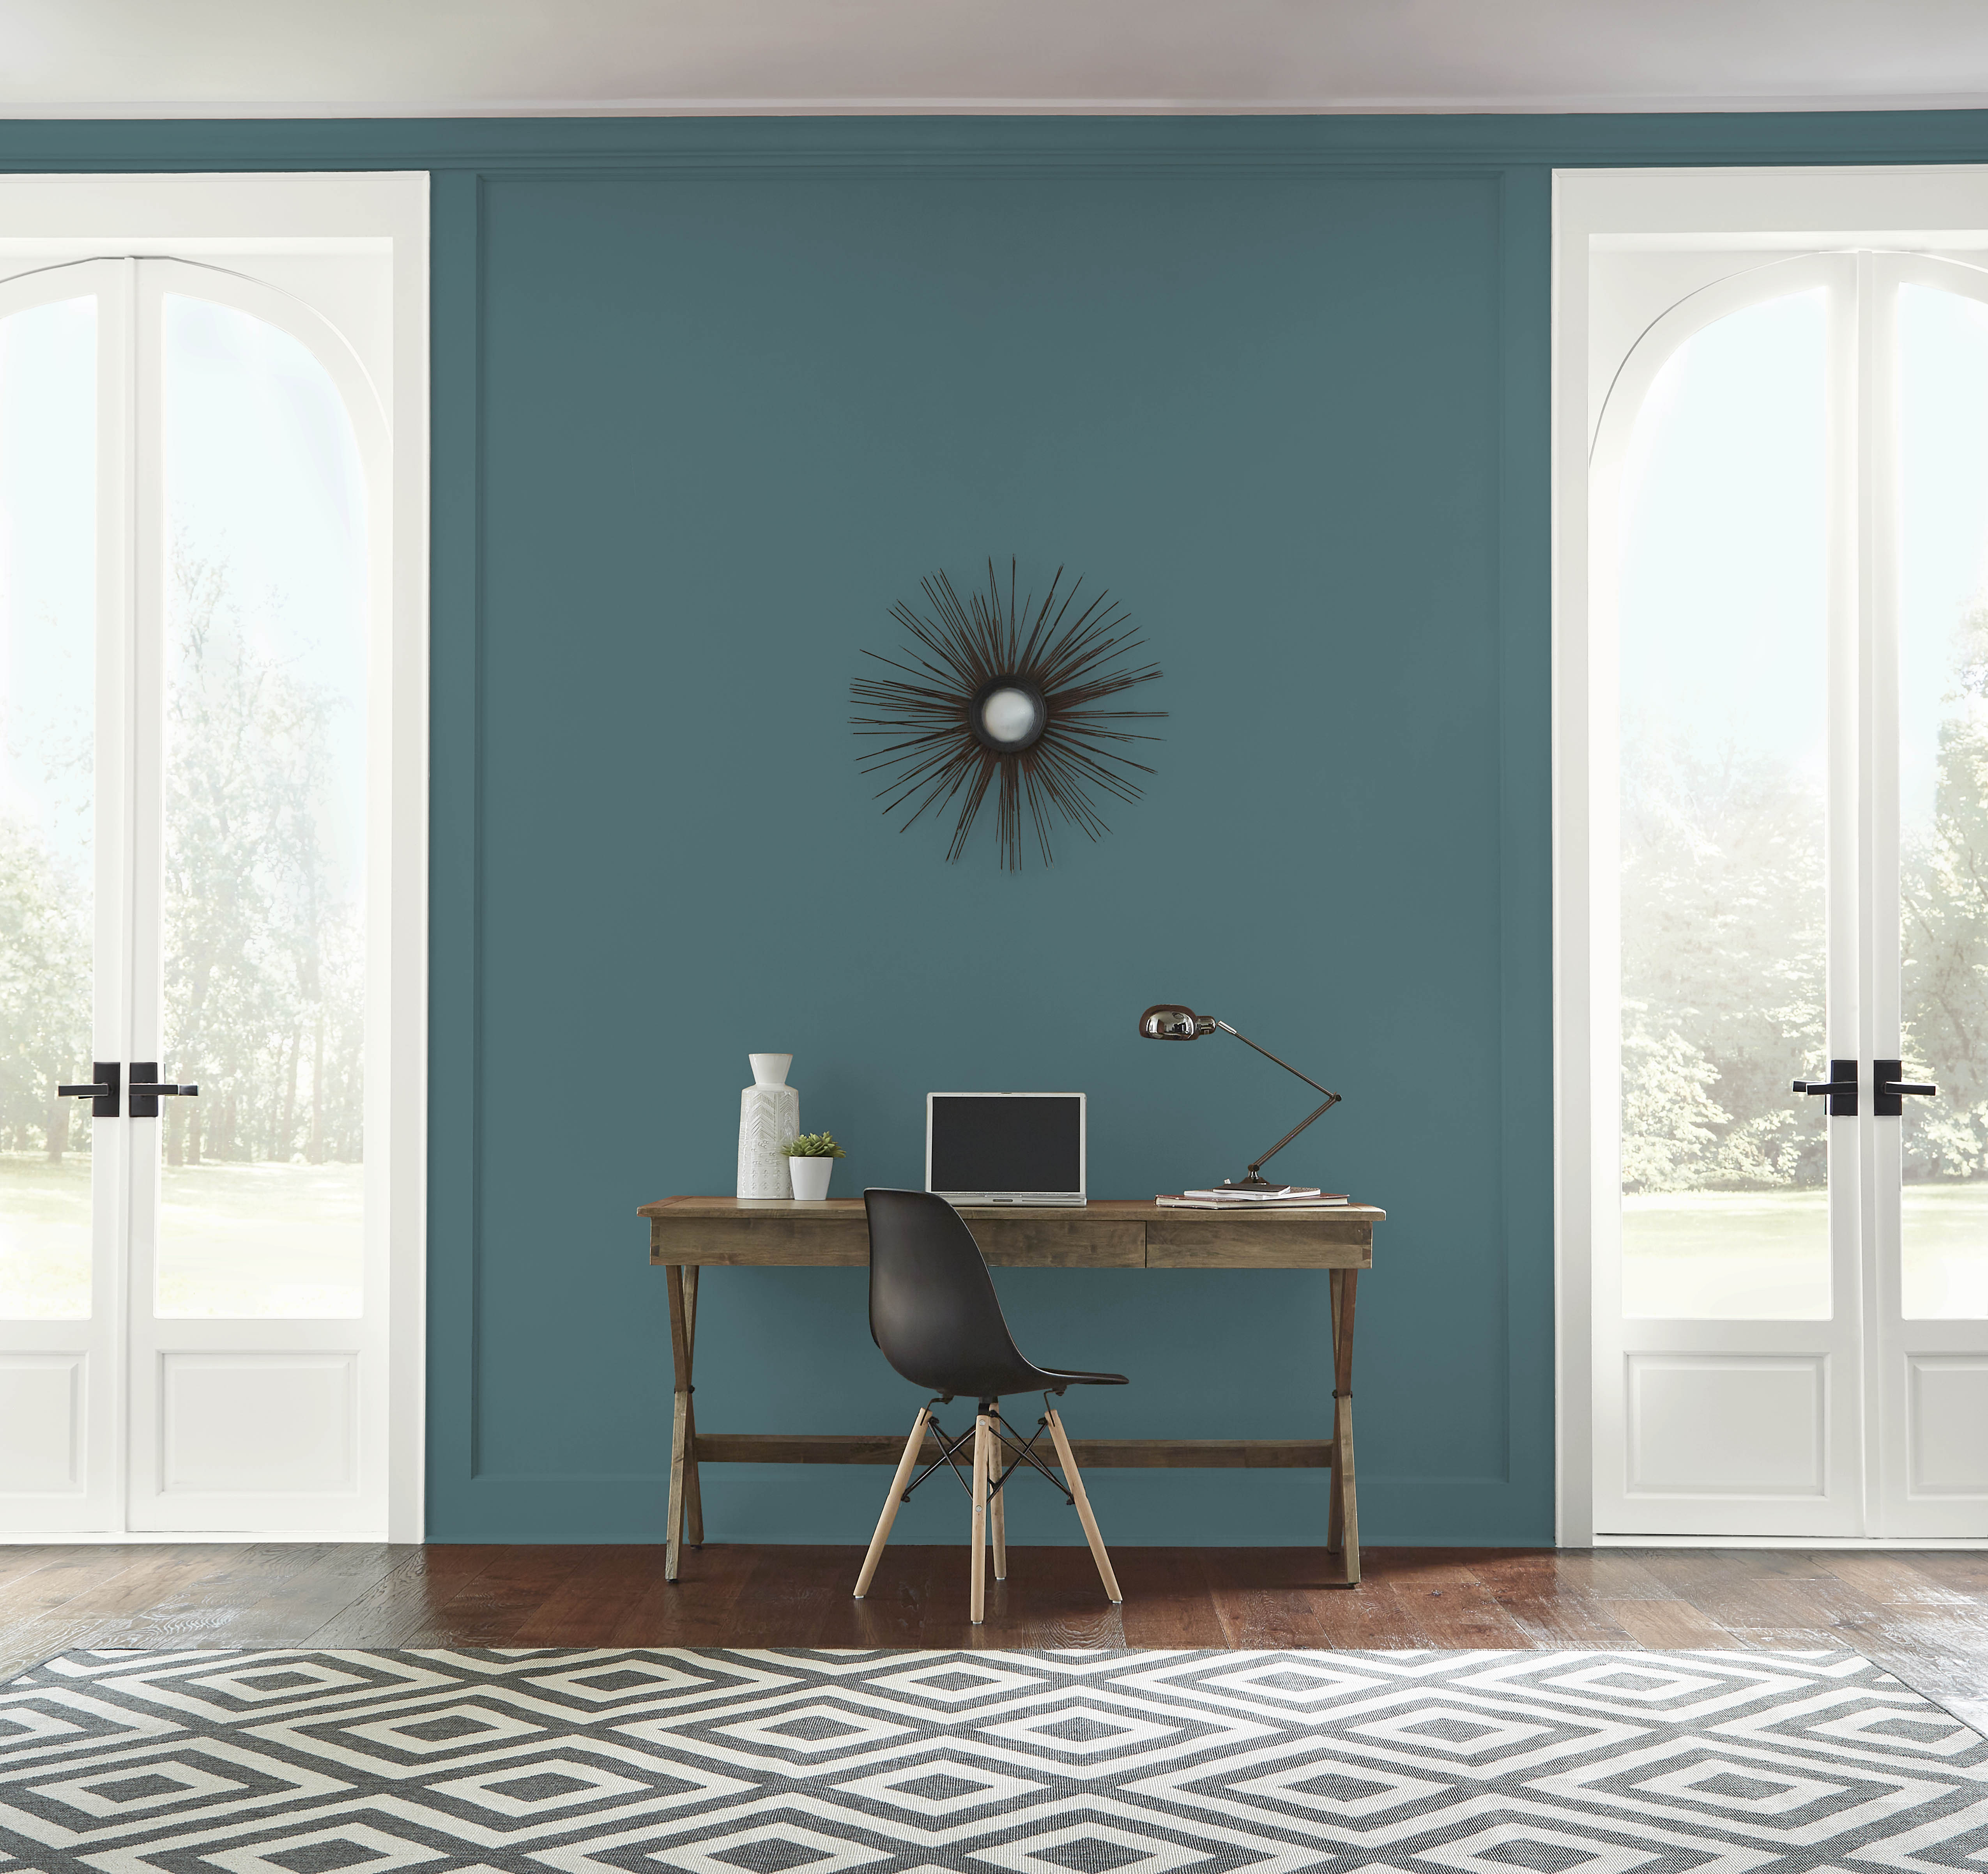 A bright living room with walls in the colour Sophisticated Teal, styled with a wood desk and chair positioned in between two sets of white French doors